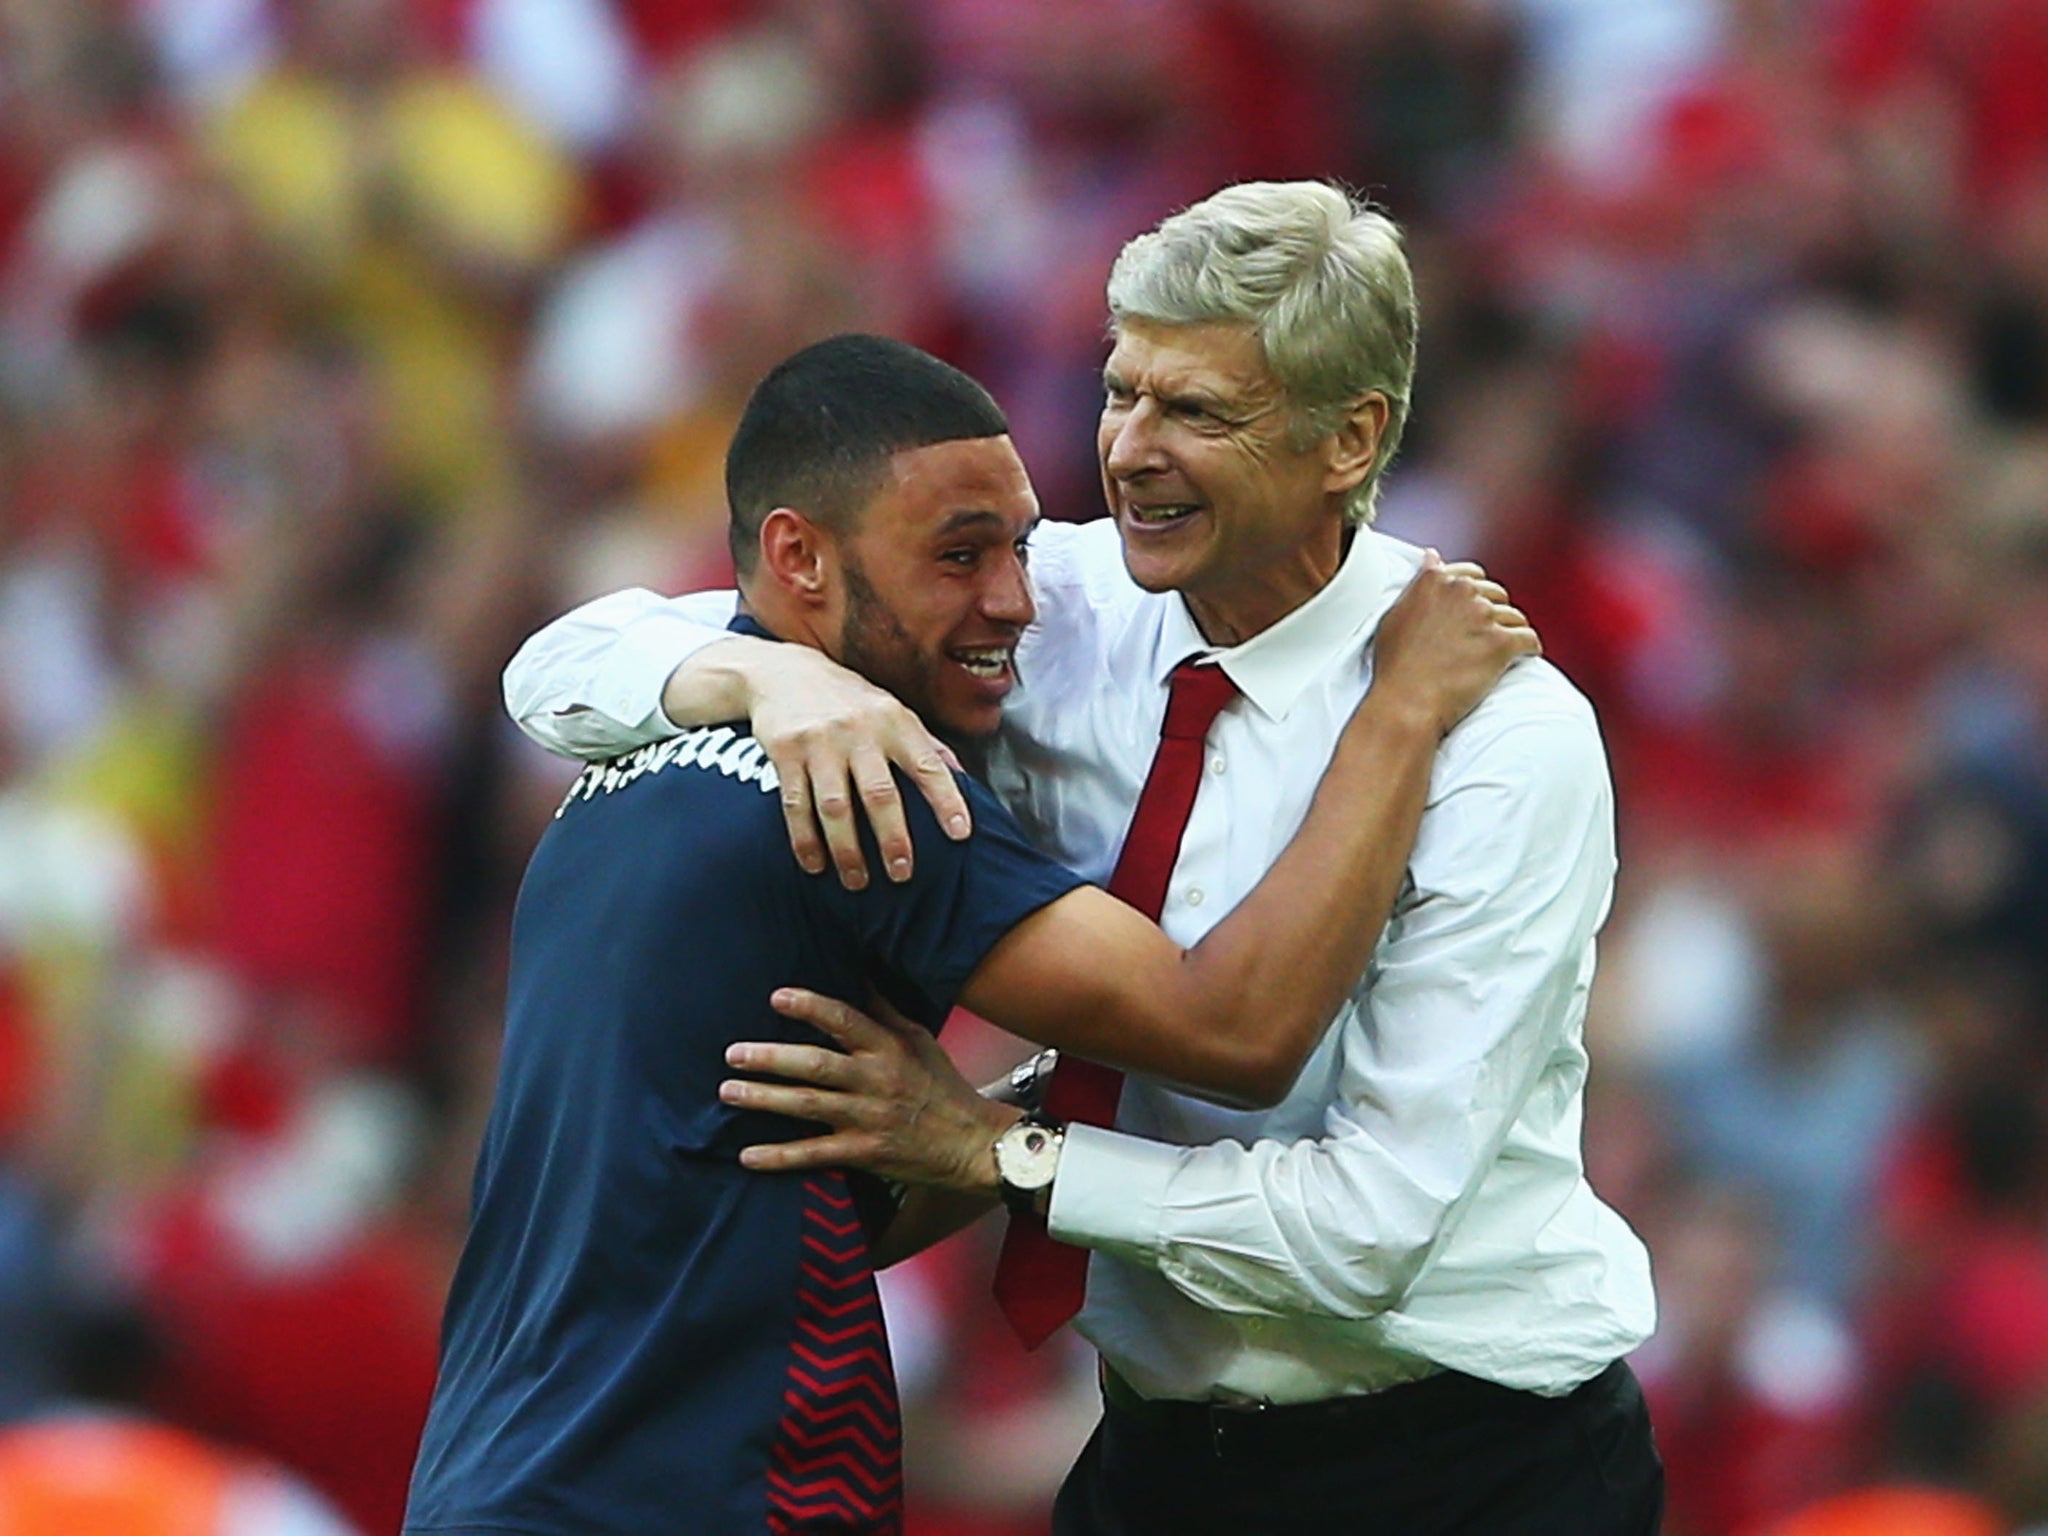 Arsene Wenger embraces Alex Oxlade-Chamberlain after the FA Cup victory